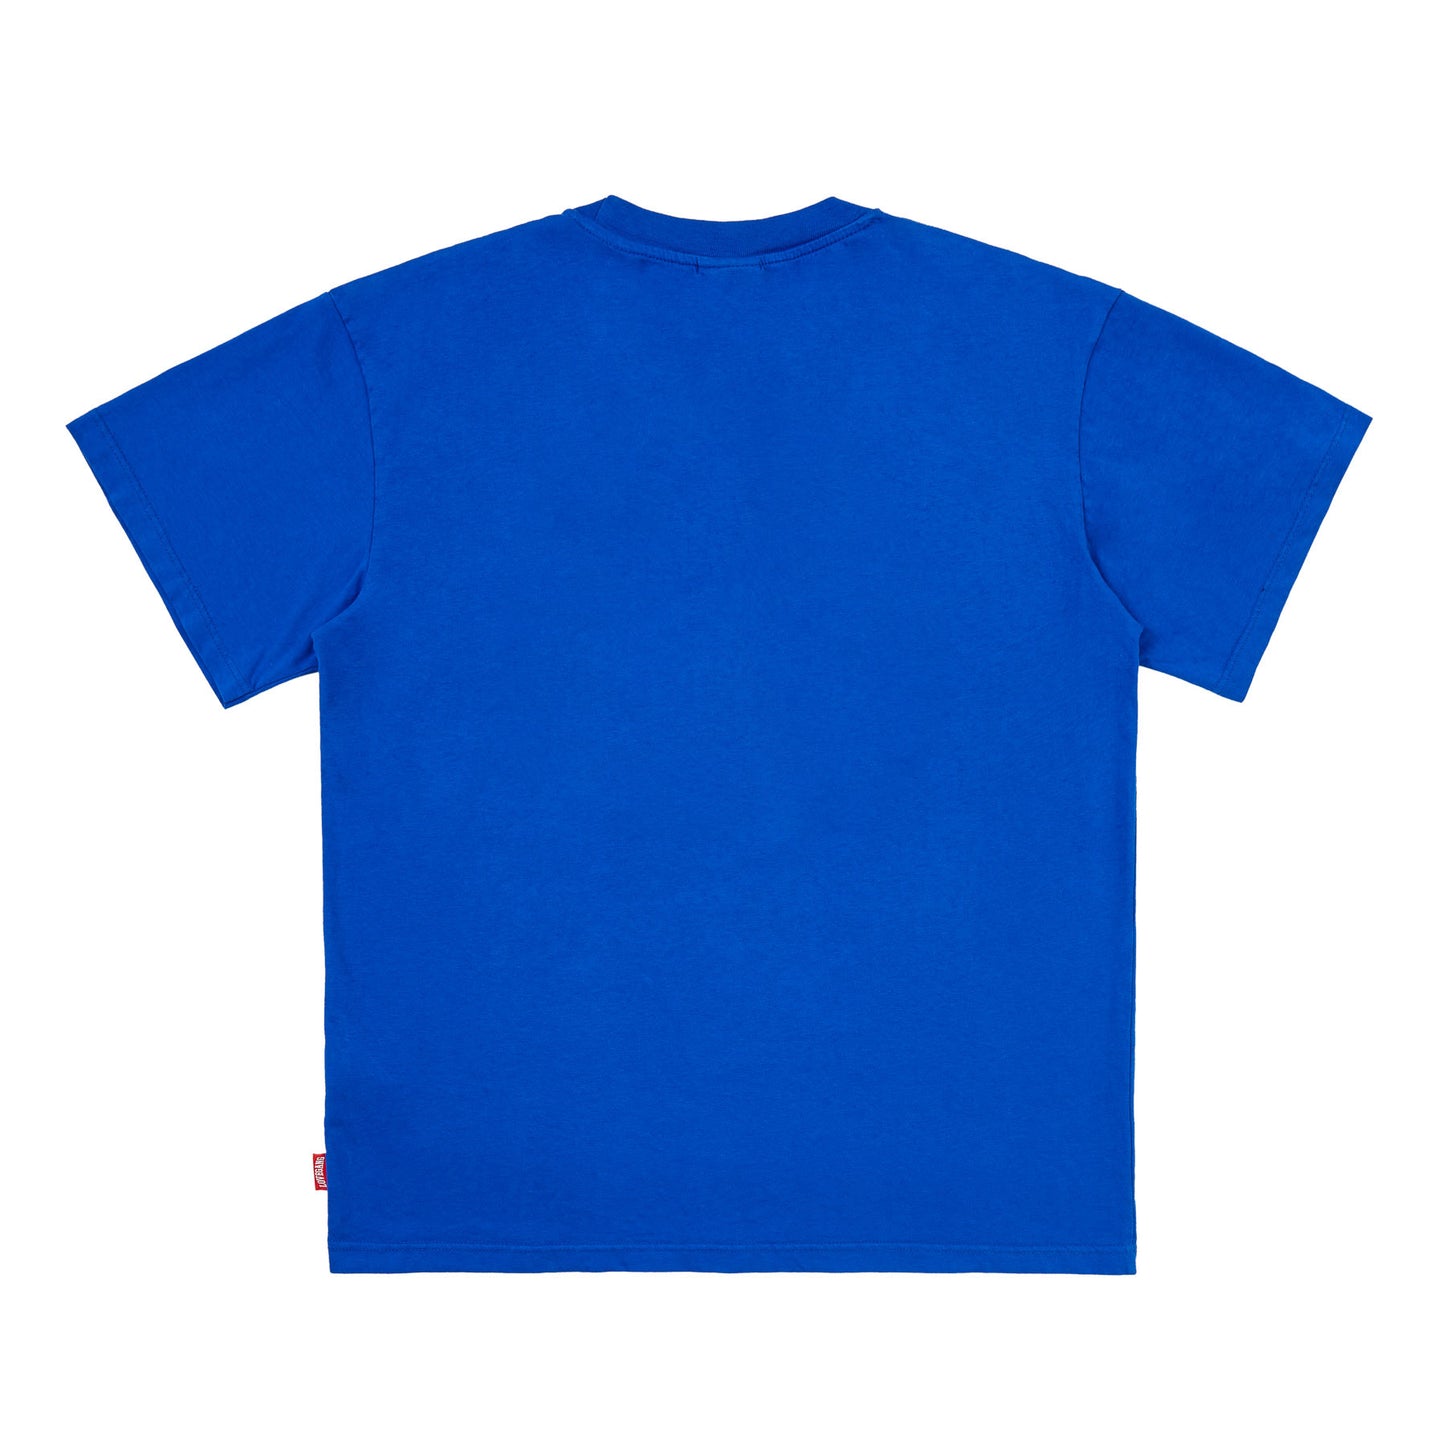 COLLEGE S/S ’23 – T-SHIRT (BL)